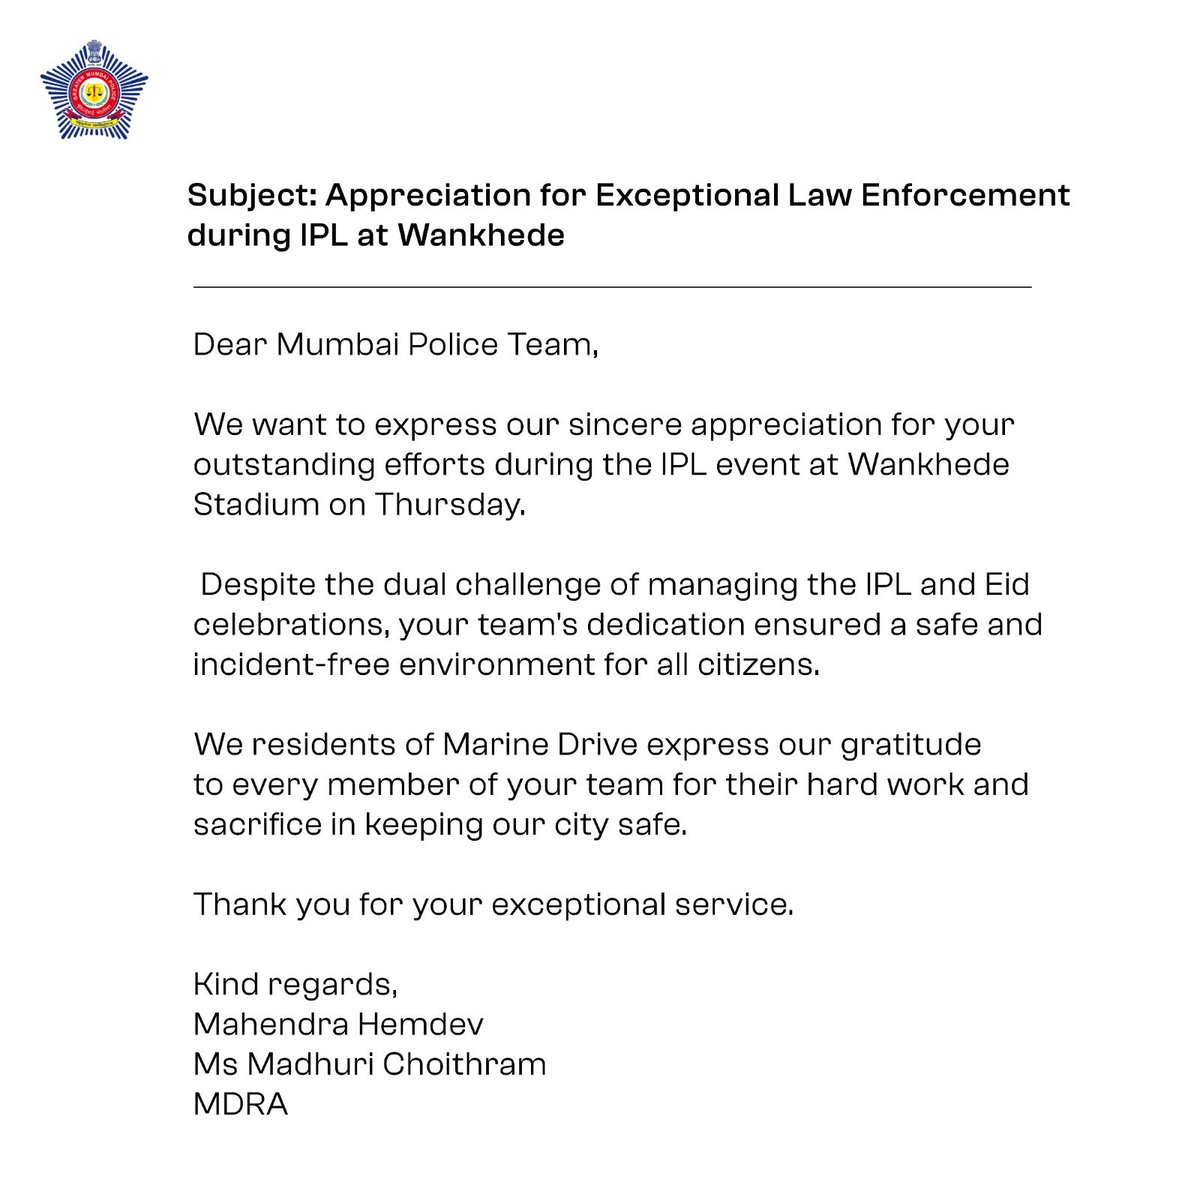 Thank You Mr Hemdev & Ms Choithram of Marine Drive Residents Association for these kind words of appreciation. We hope and aspire to uphold these values everyday.